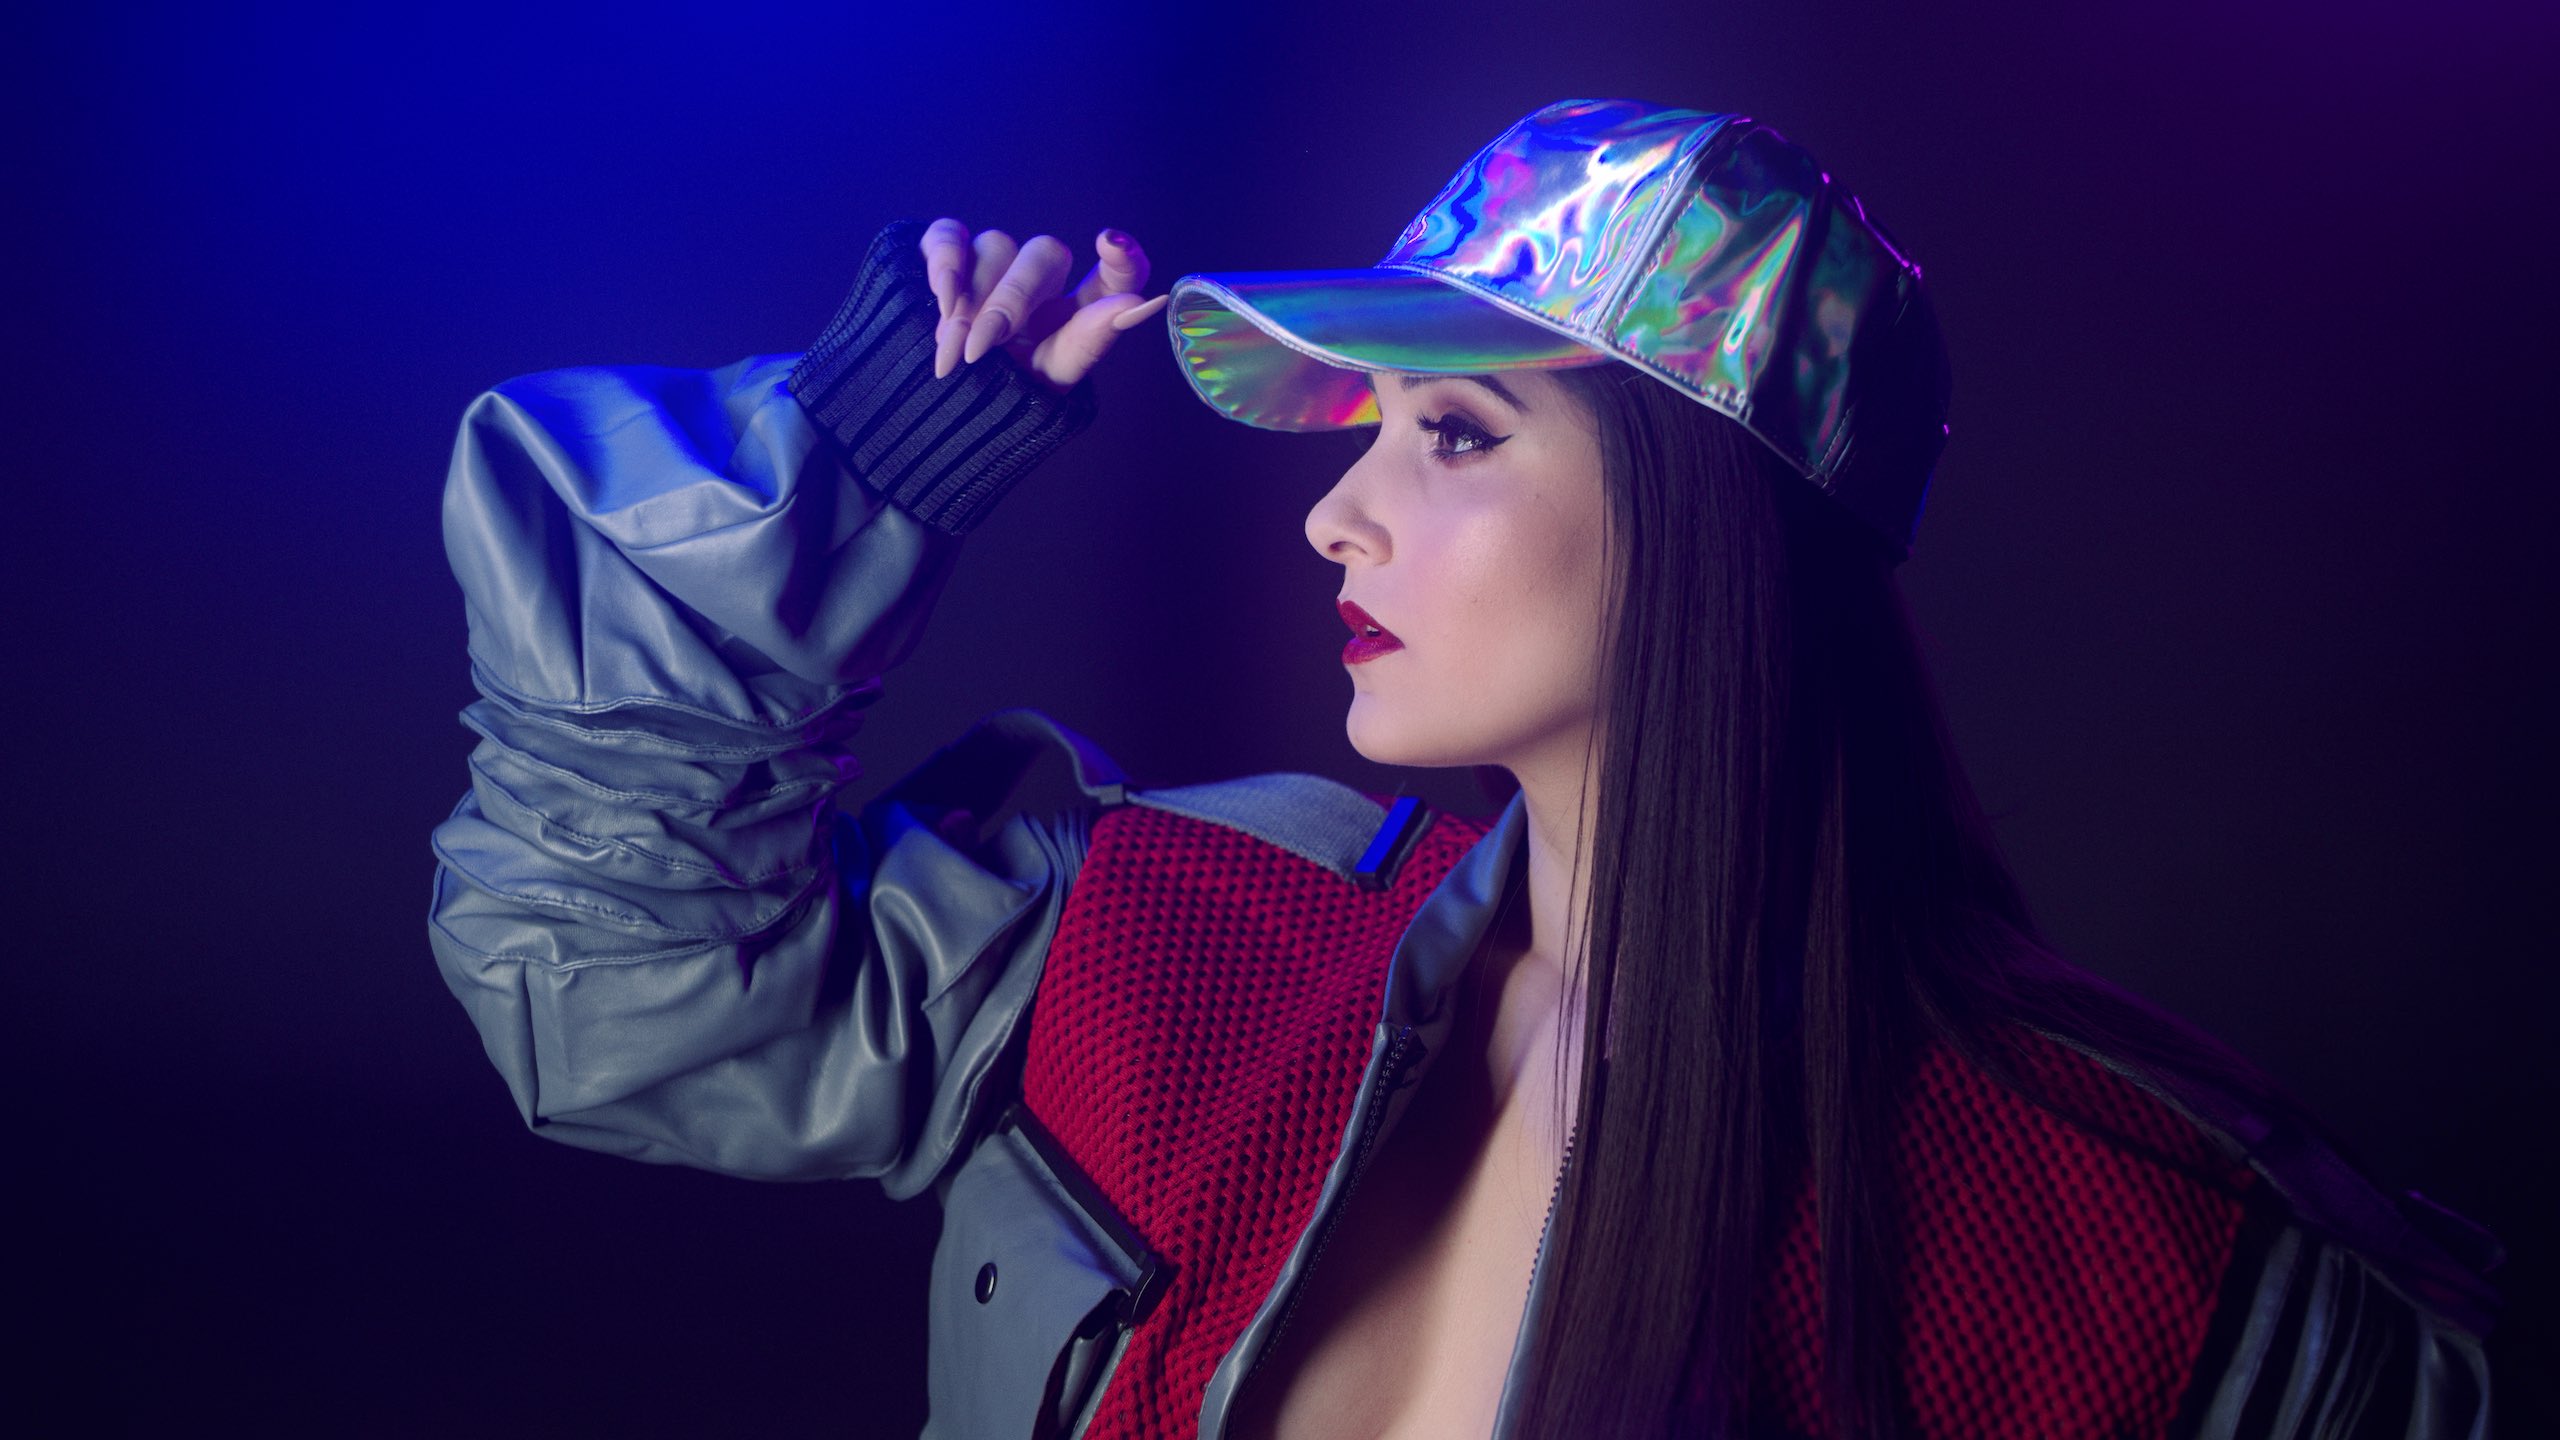 The Delorean Uncreative Music Woman holding her multicolored cap and wearing red and gray jacket